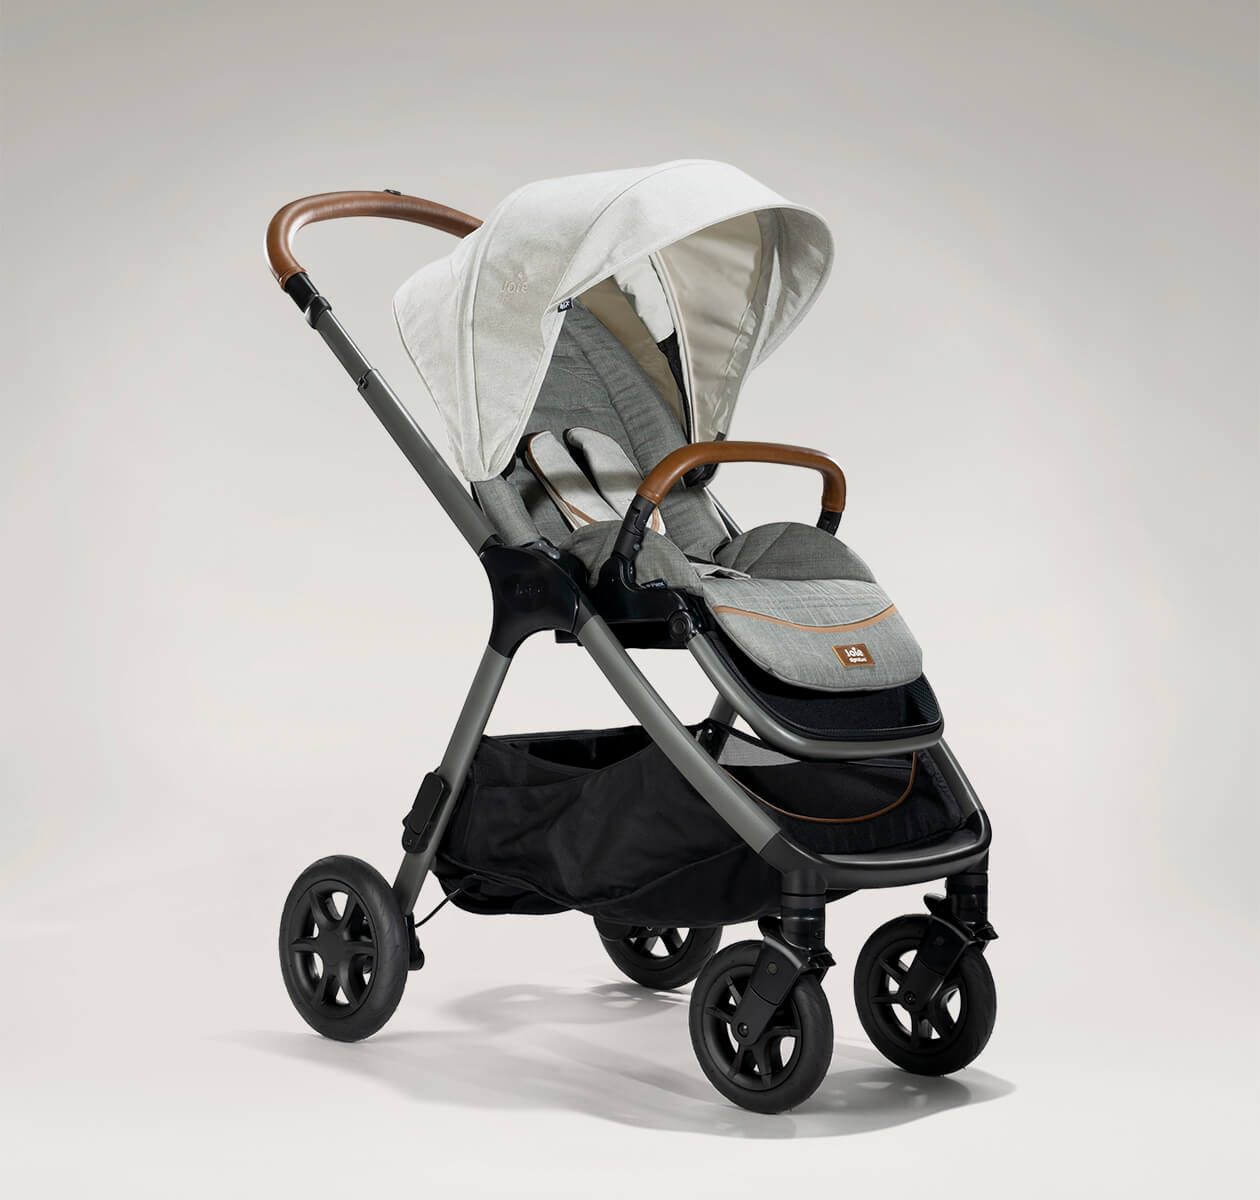 Joie finiti pram in light gray at an angle.